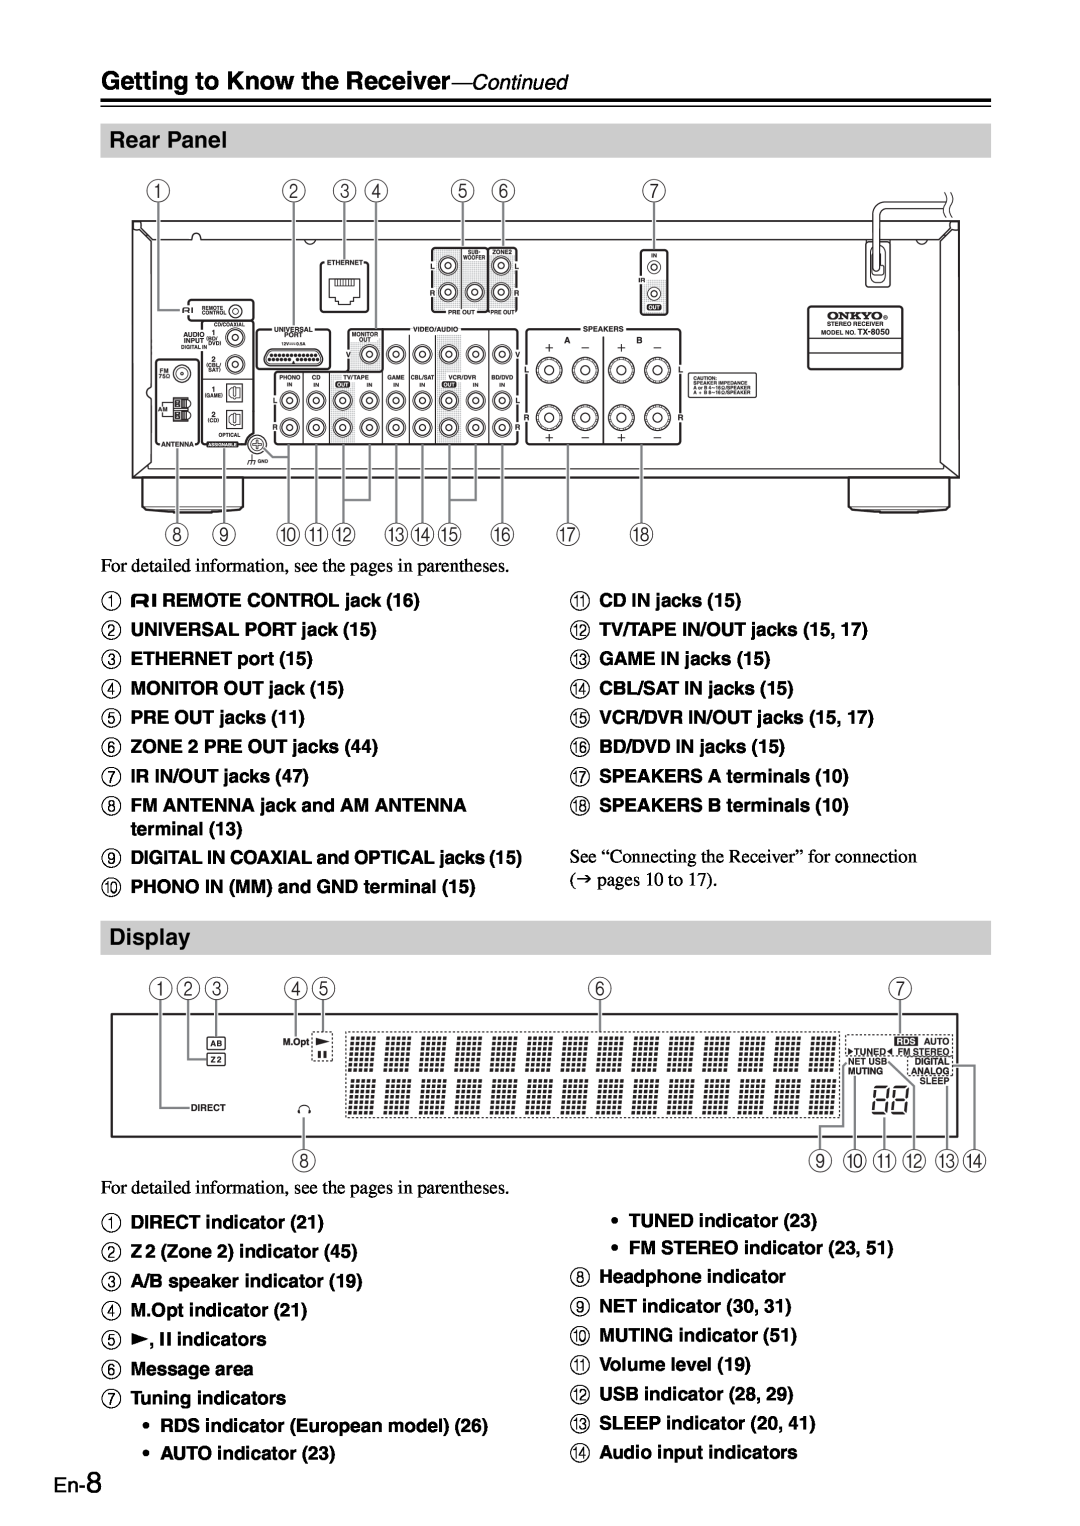 Onkyo TX-8050 instruction manual Getting to Know the Receiver-Continued 